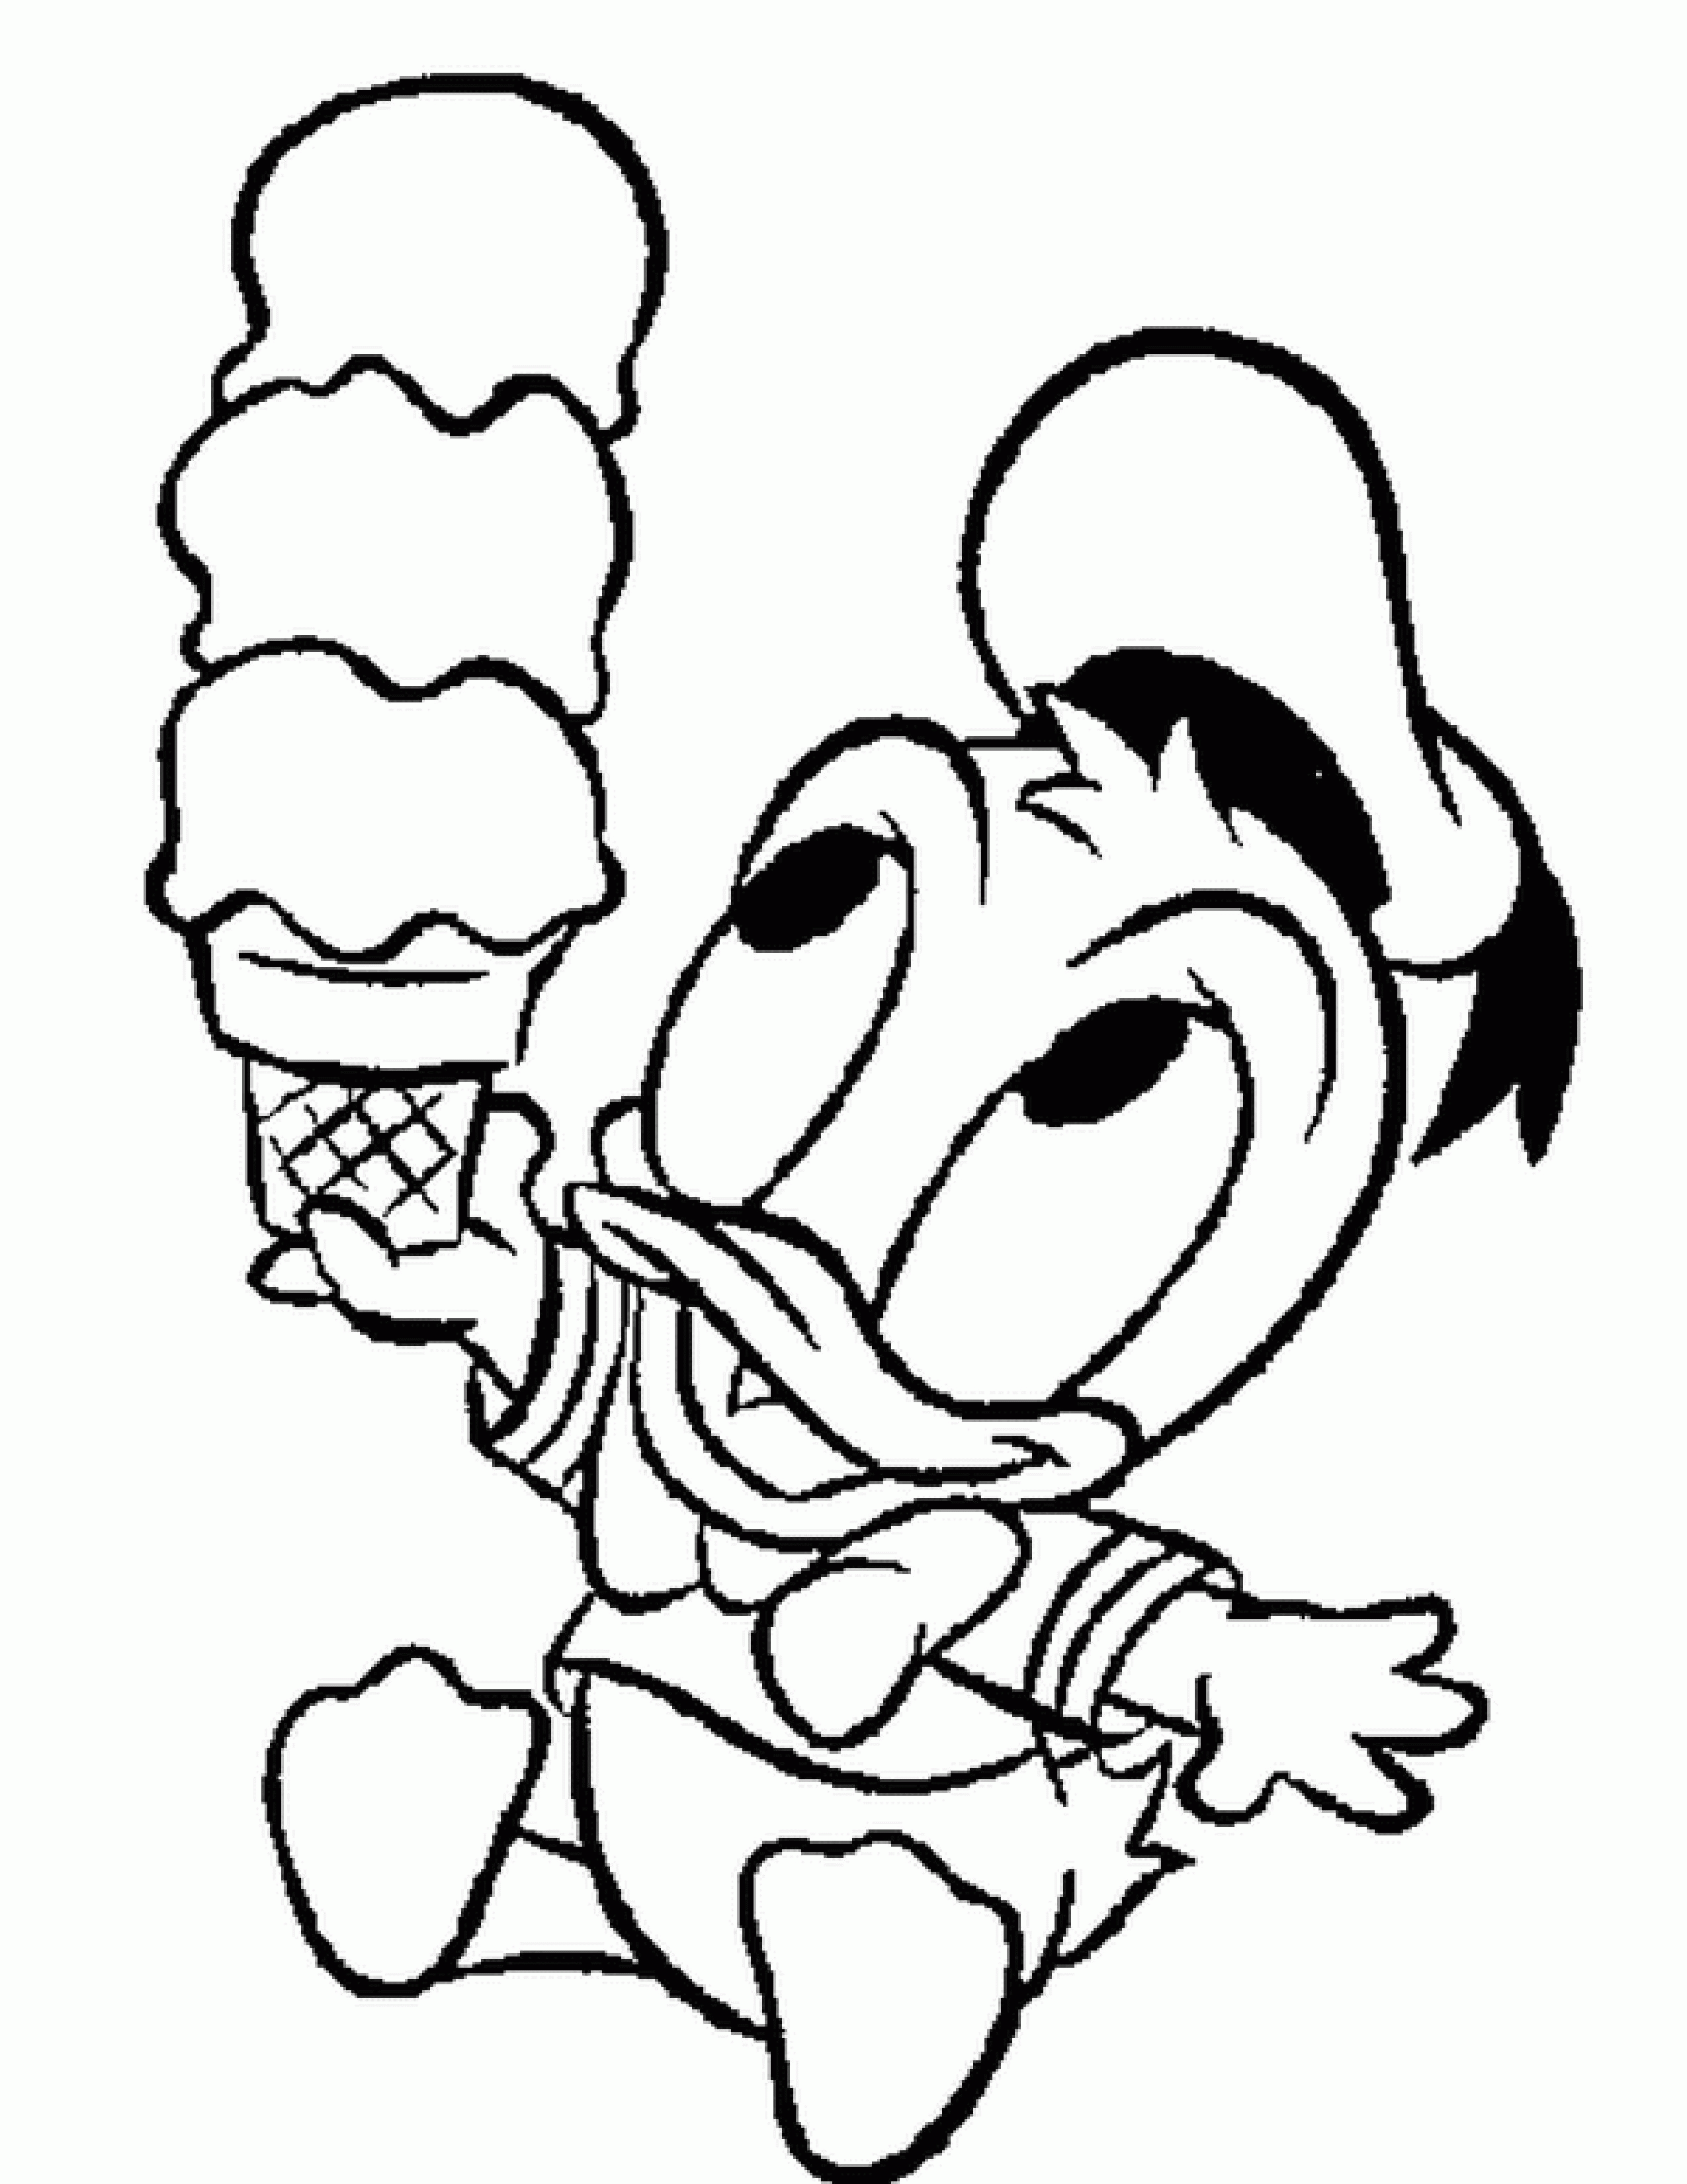 Coloring Pages Disney Cartoon Characters - Coloring - Coloring Home